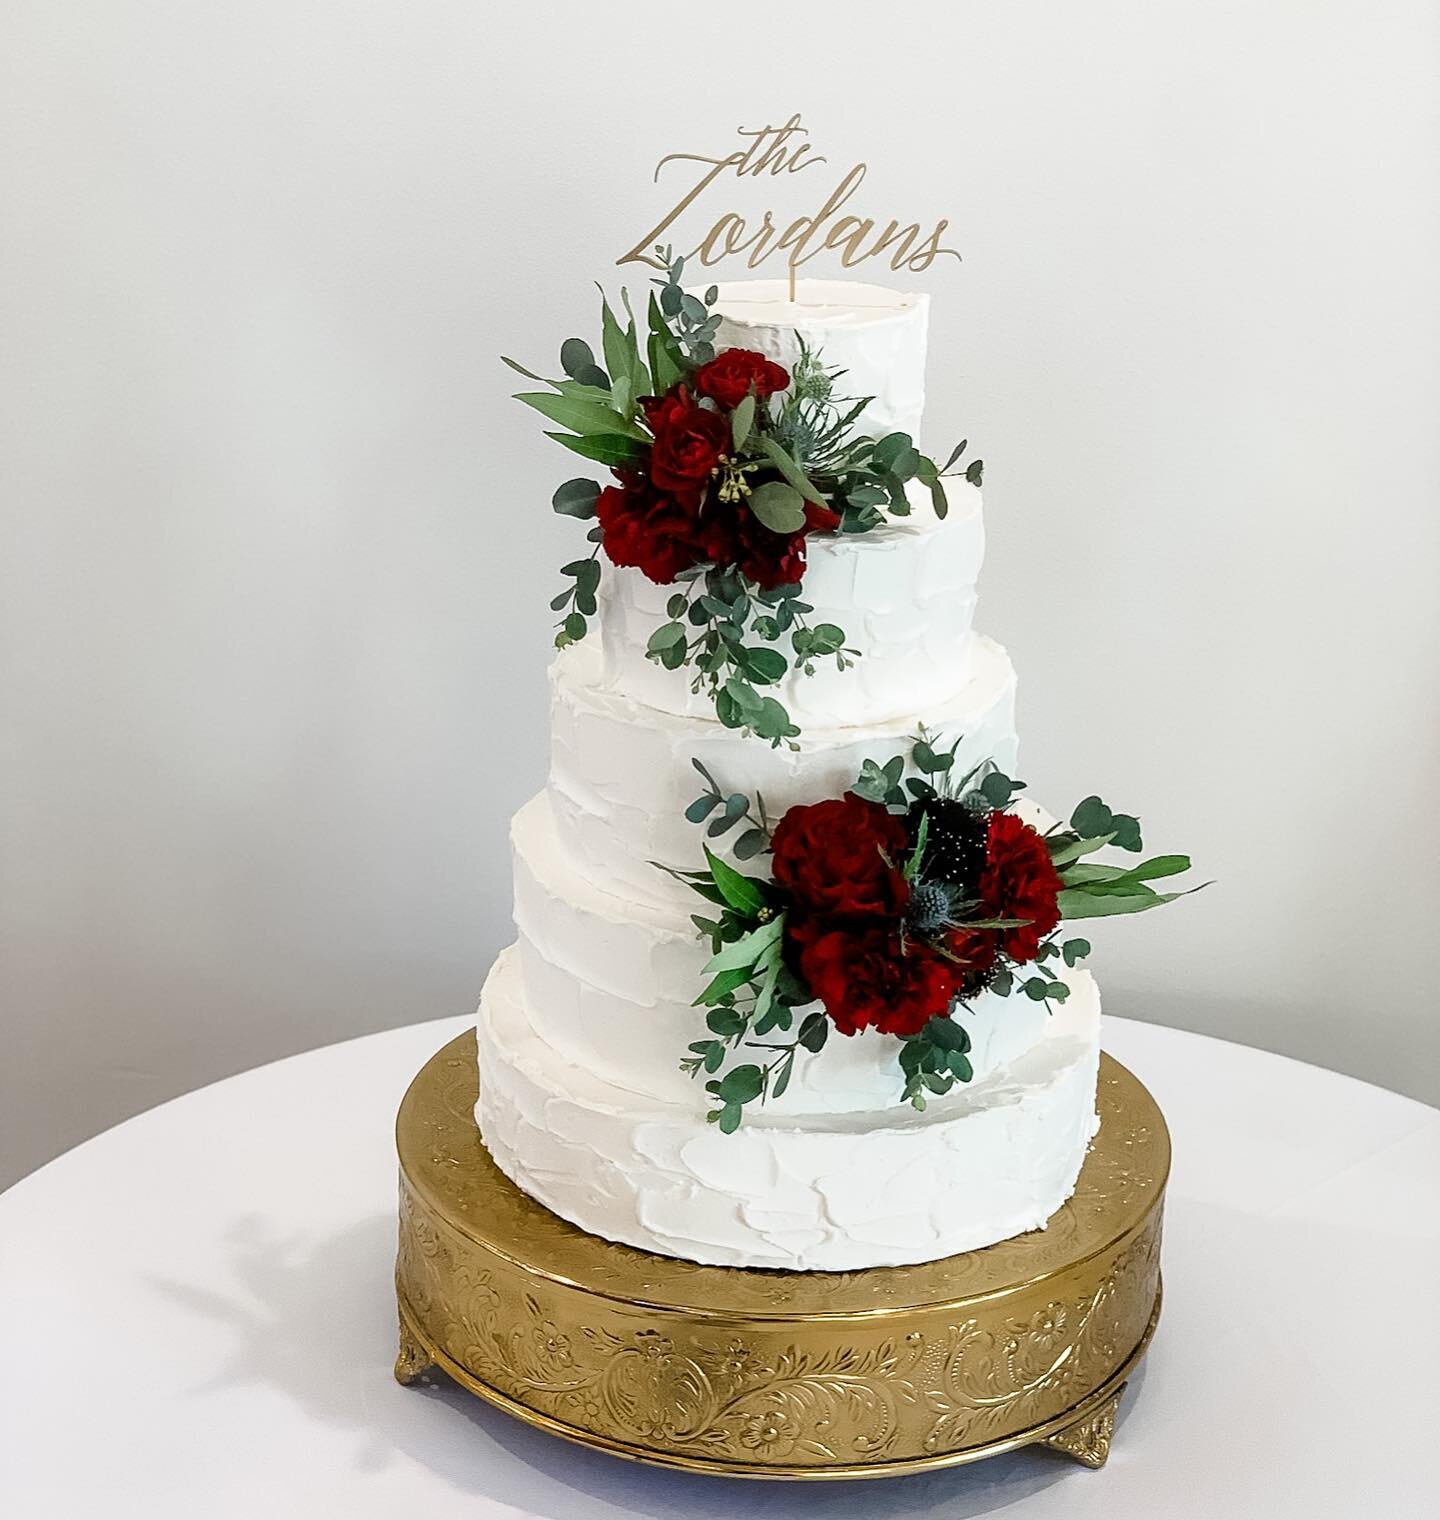 Bordeaux or bust! This shade will always be one of our faves but who is ready for some bright and colorful spring hues? 🙋🏻&zwj;♀️ 

.
.
.
.
#bordeaux #crimson #burgundy #cakeflowers #wedding #cakedesign #weddingcake #caketier